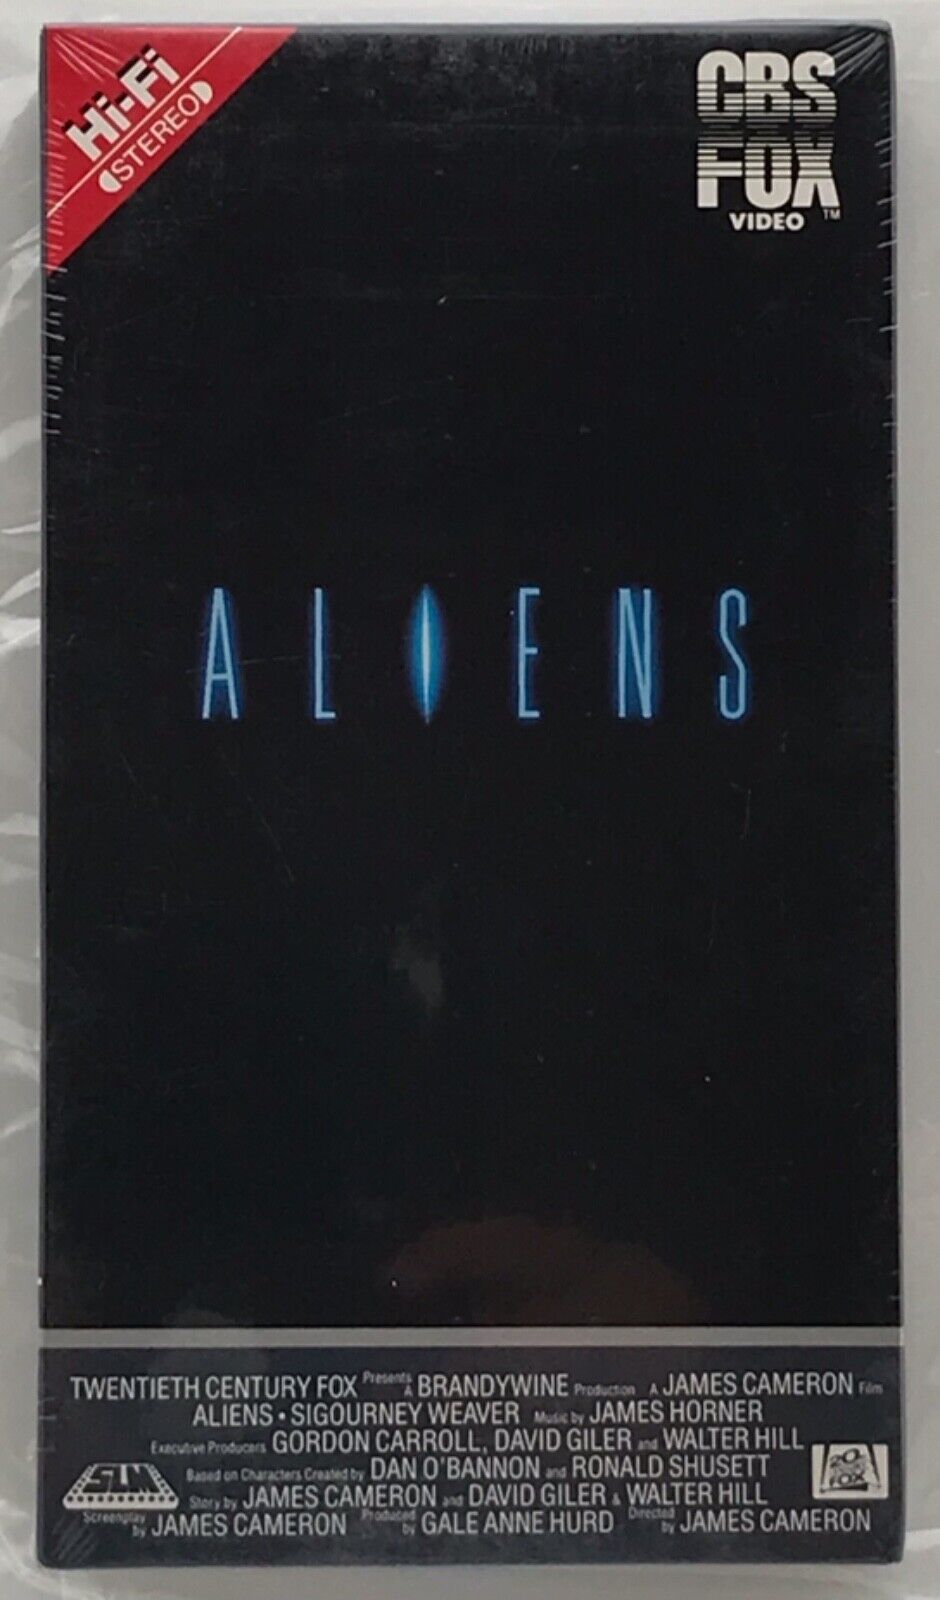 Aliens Sealed VHS Tape 1986 Stereo Red Label CBS FOX Watermarks NOS \'87 release